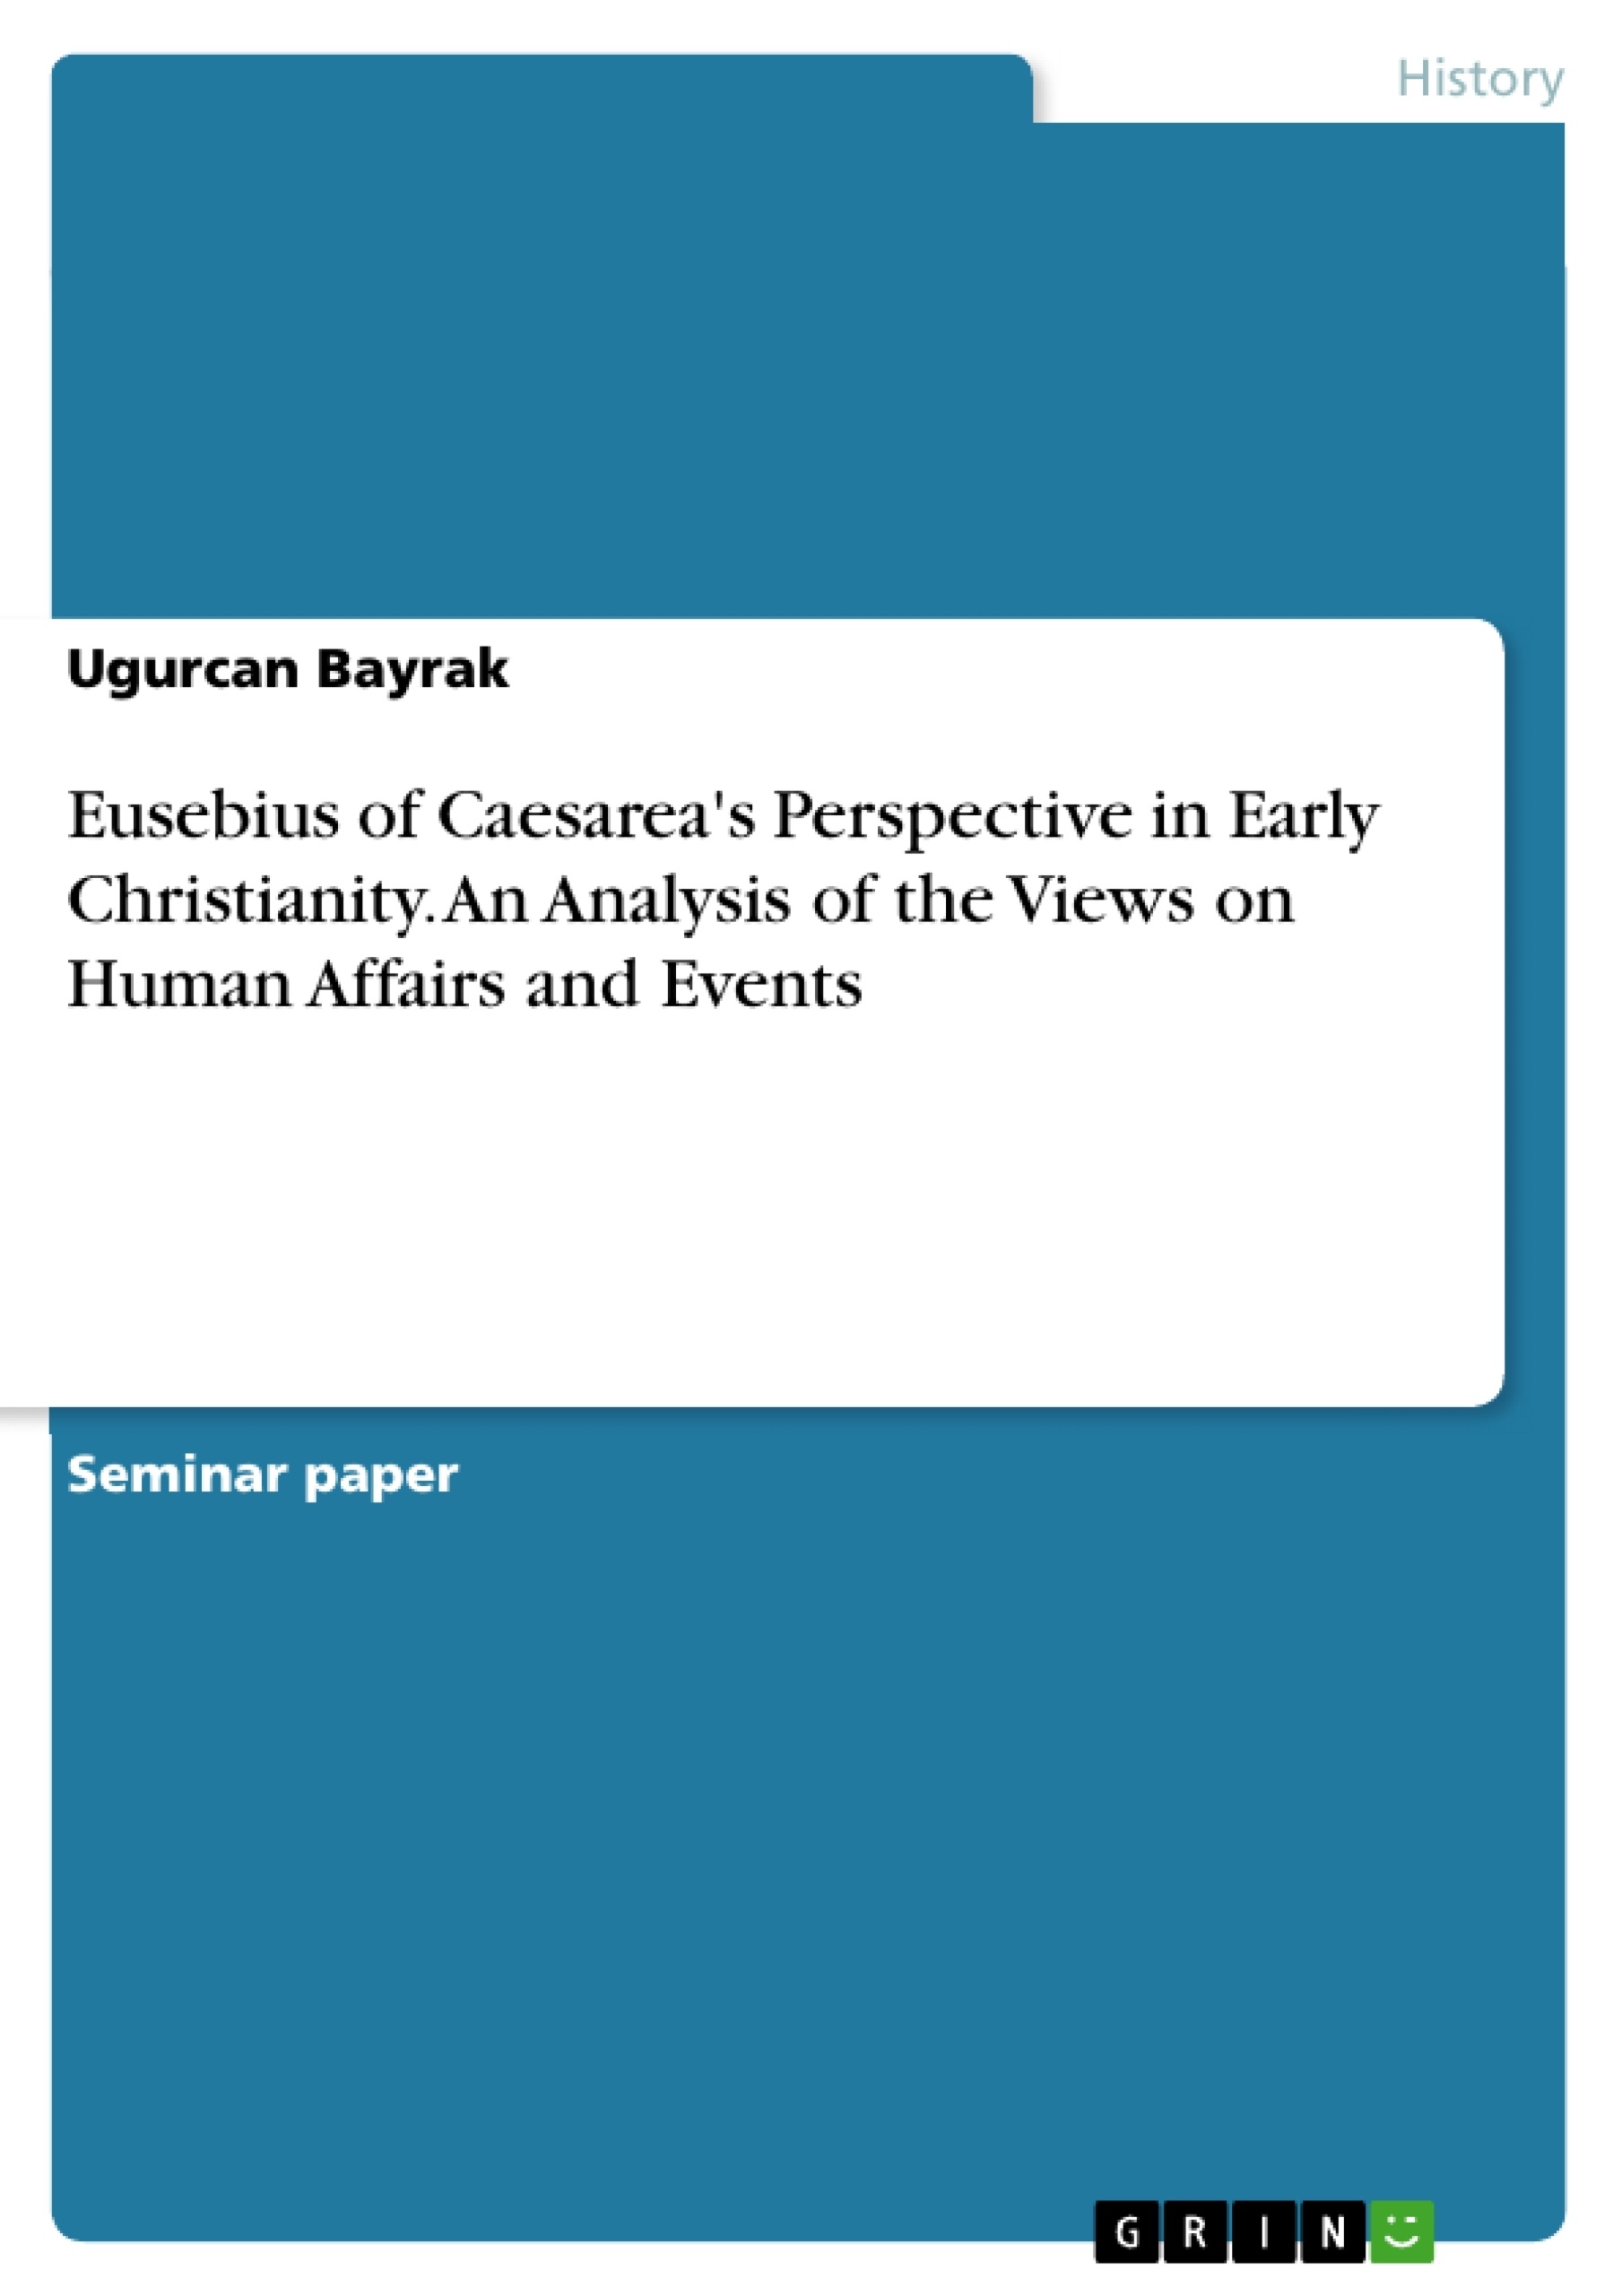 Título: Eusebius of Caesarea's Perspective in Early Christianity. An Analysis of the Views on Human Affairs and Events